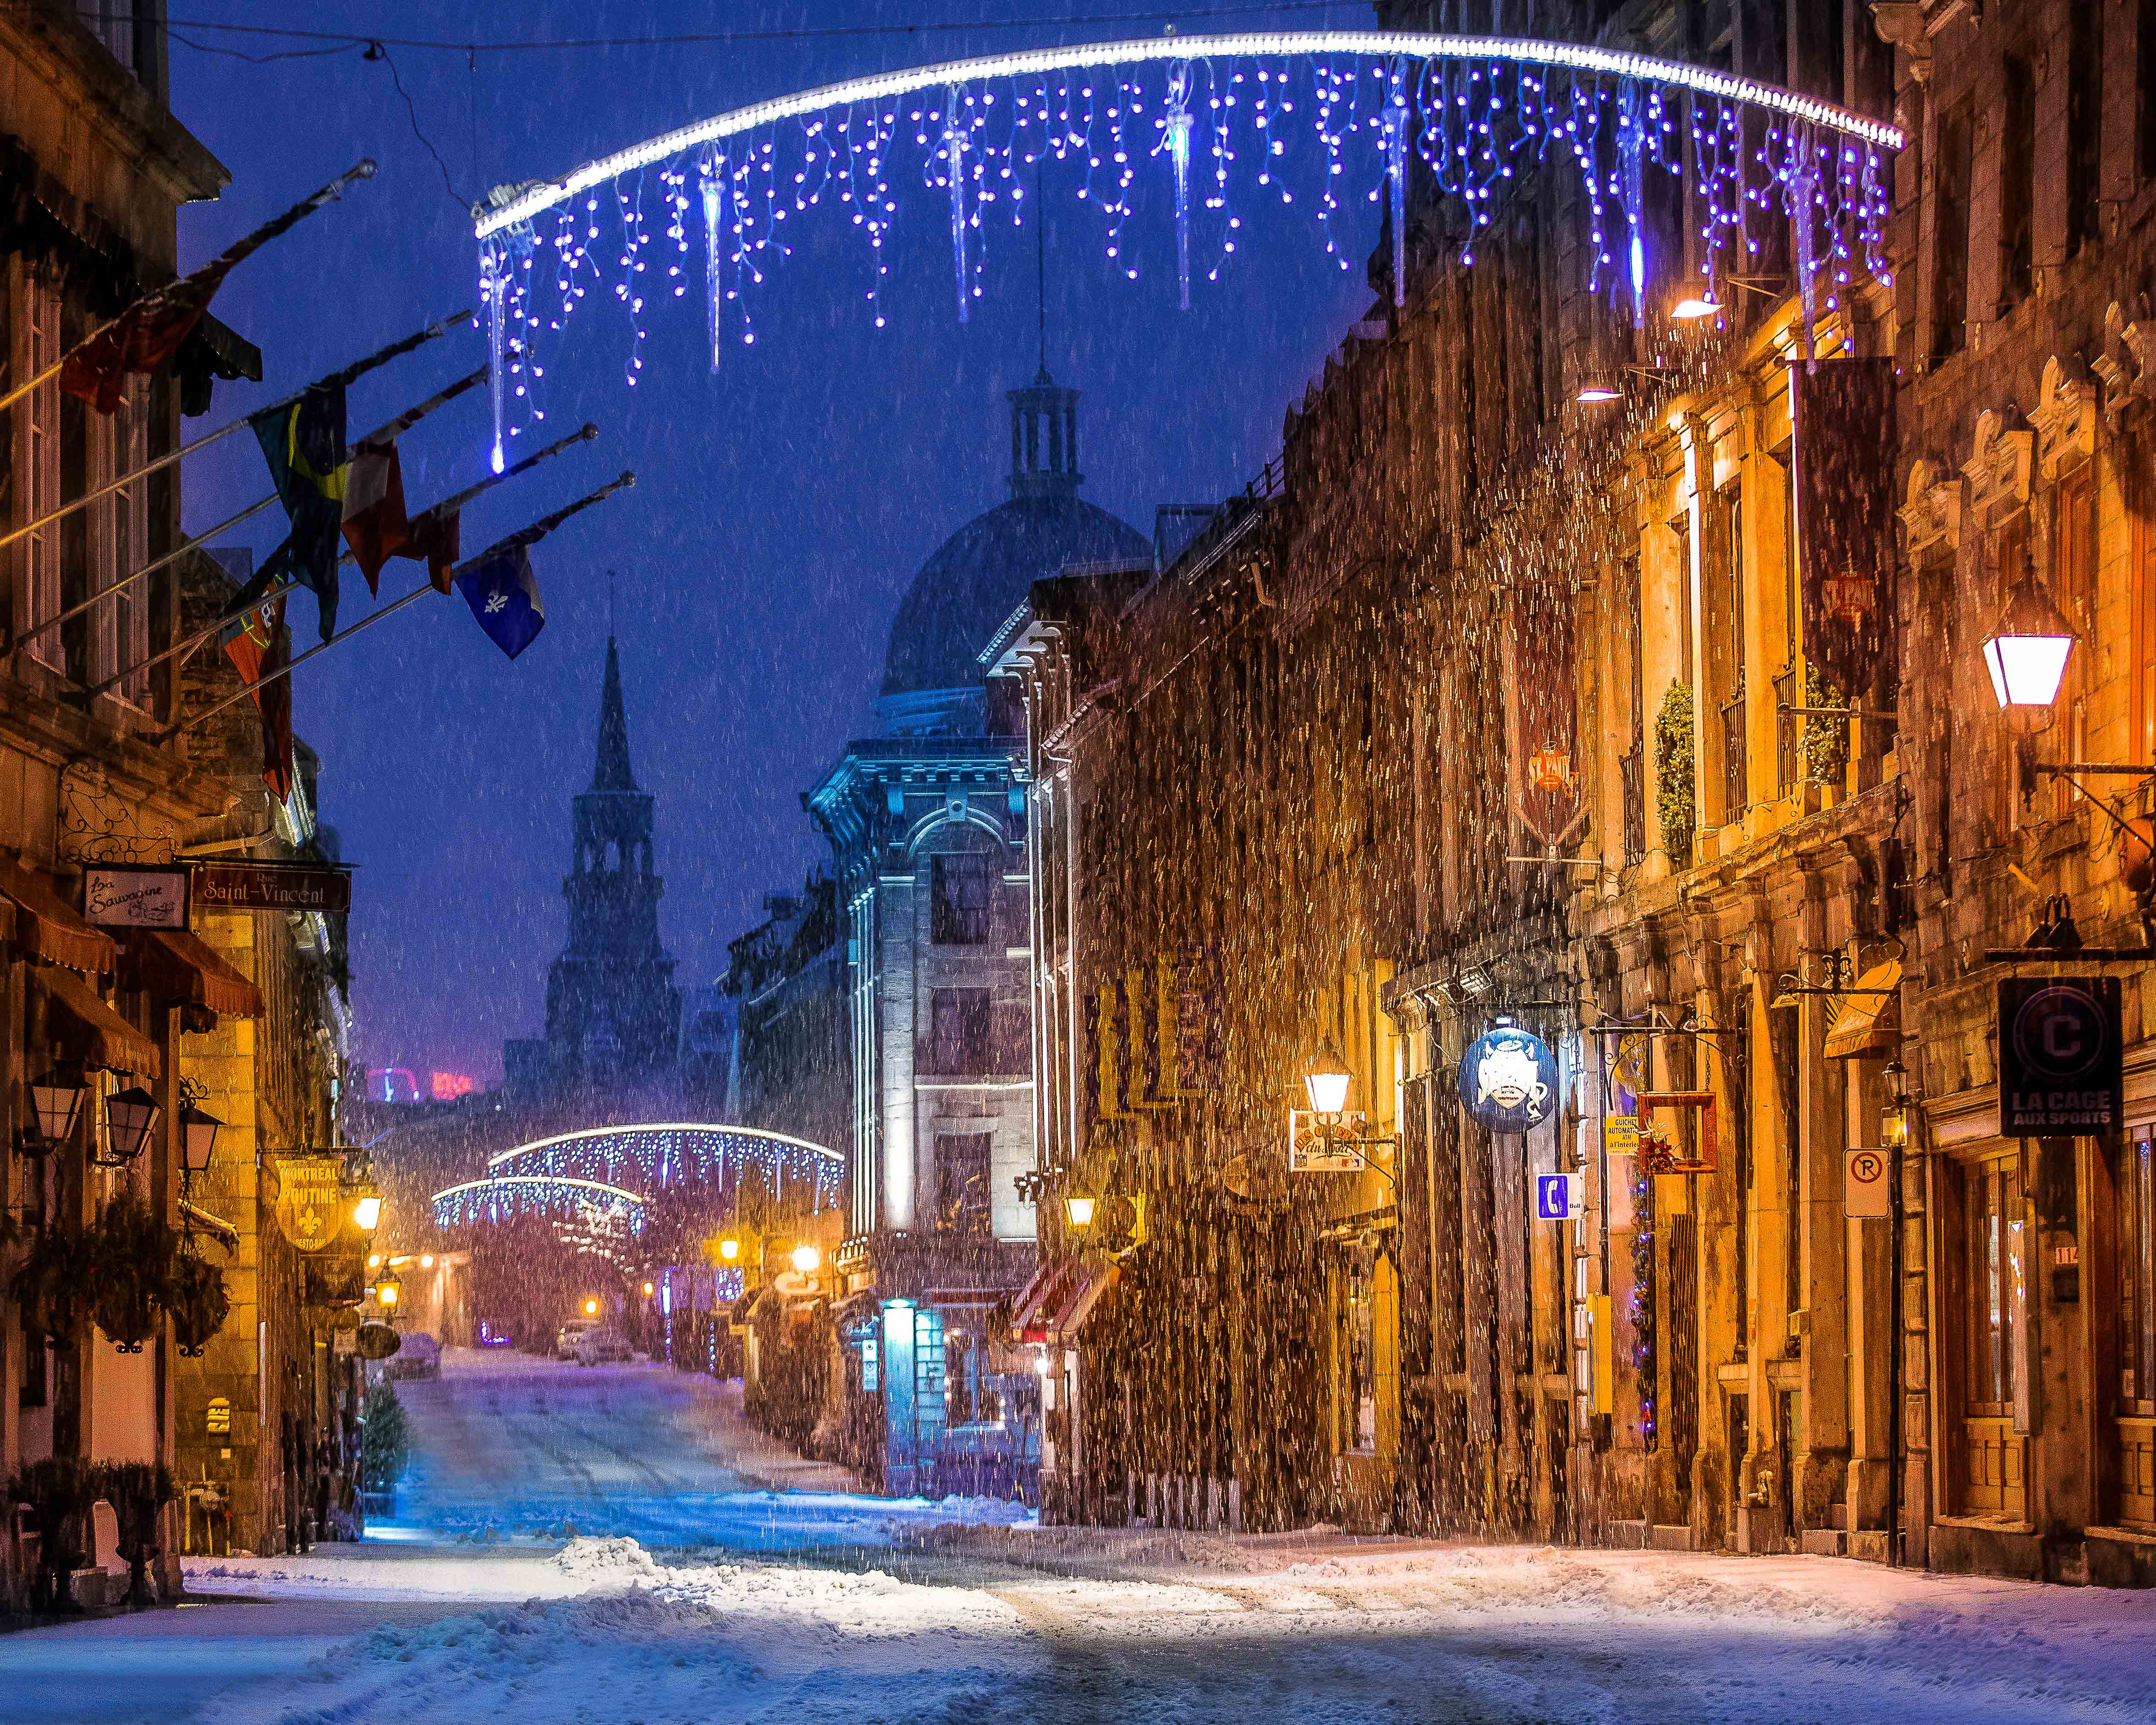 Montreal Travel Guide: snow falling in Montreal at Christmas. 